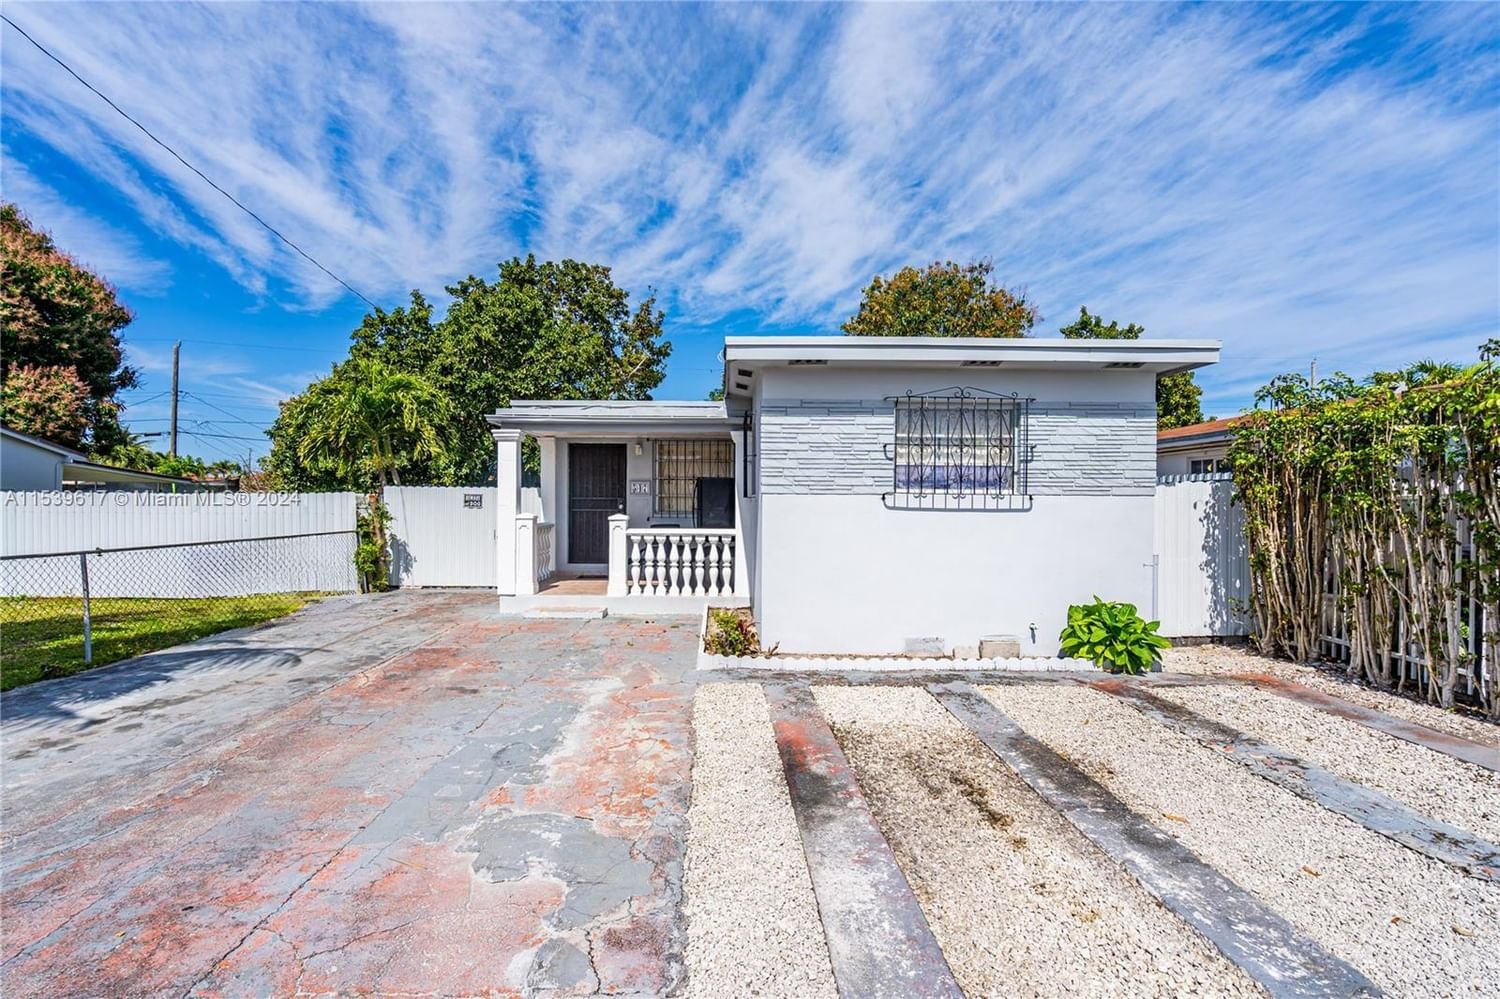 Real estate property located at 547 35th St, Miami-Dade County, HIALEAH 14TH ADDN REV PL, Hialeah, FL